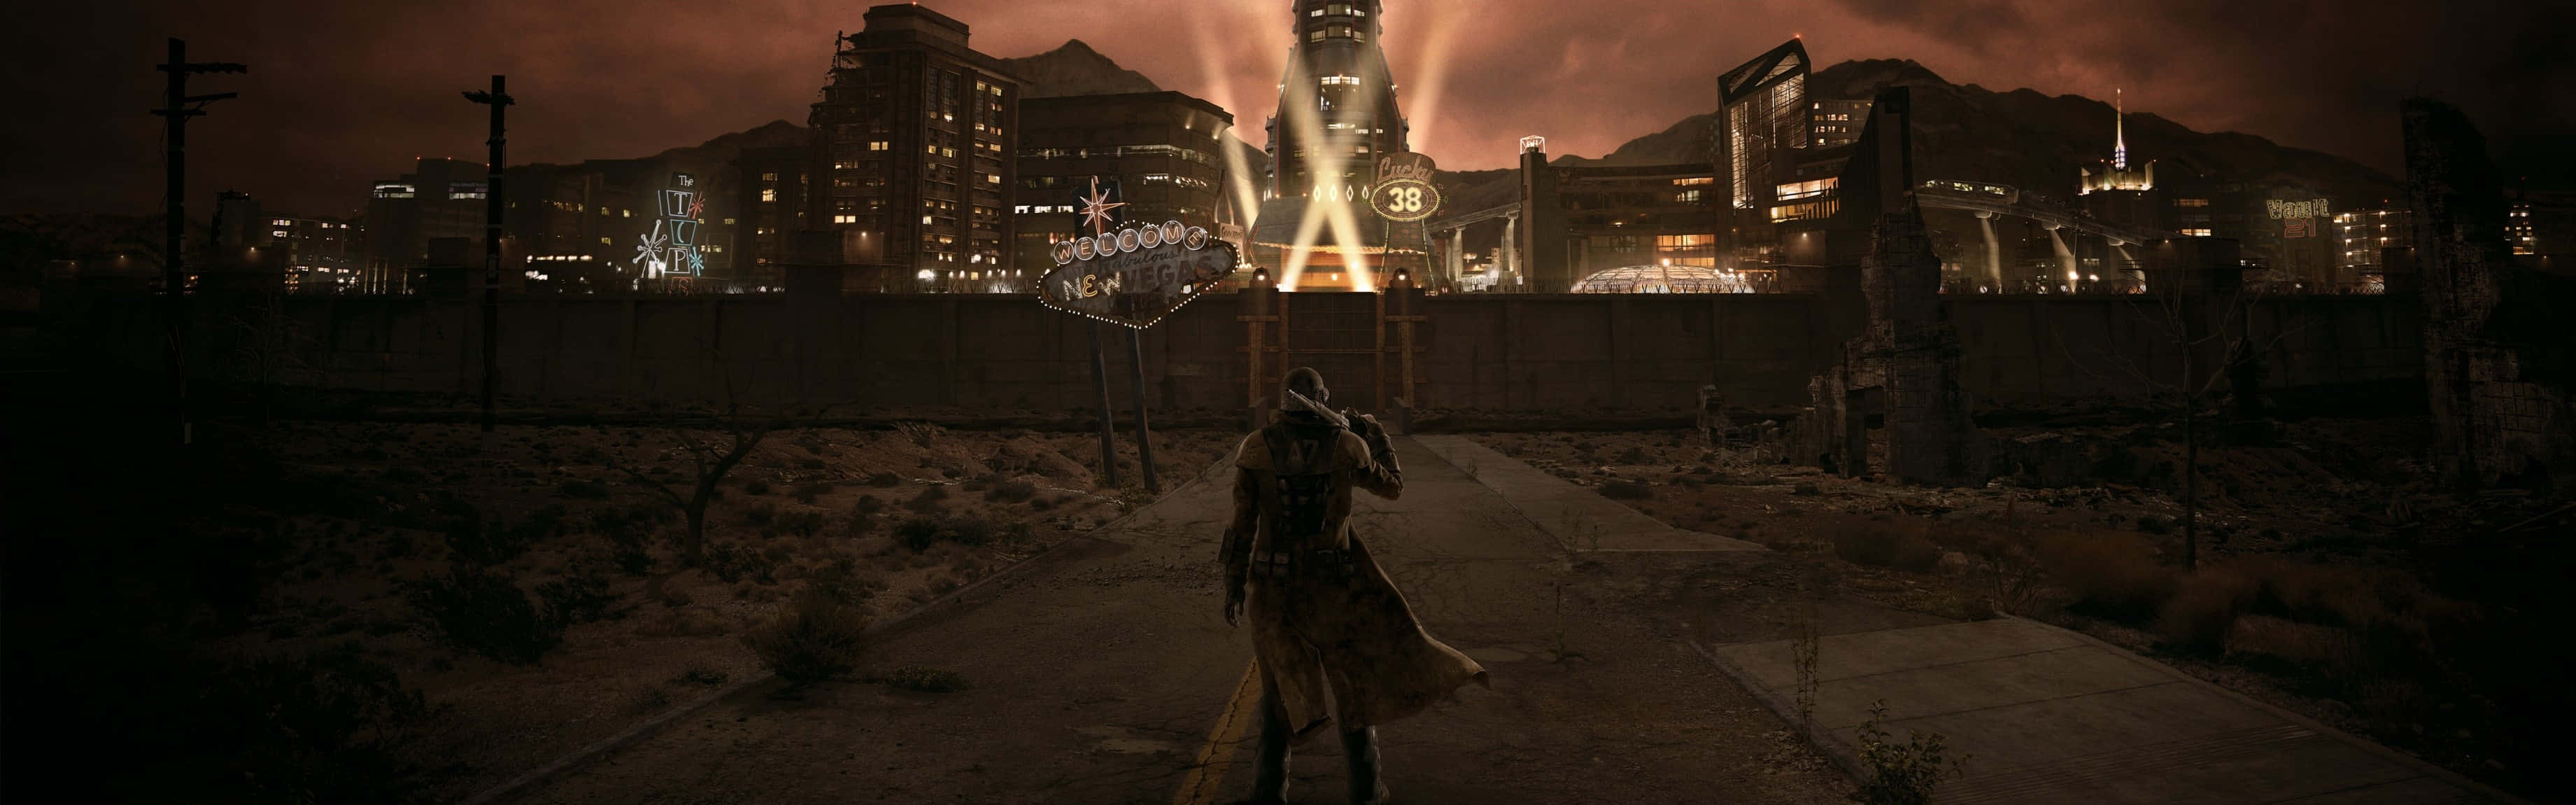 Explore The Wasteland Of Fallout: New Vegas Wallpaper